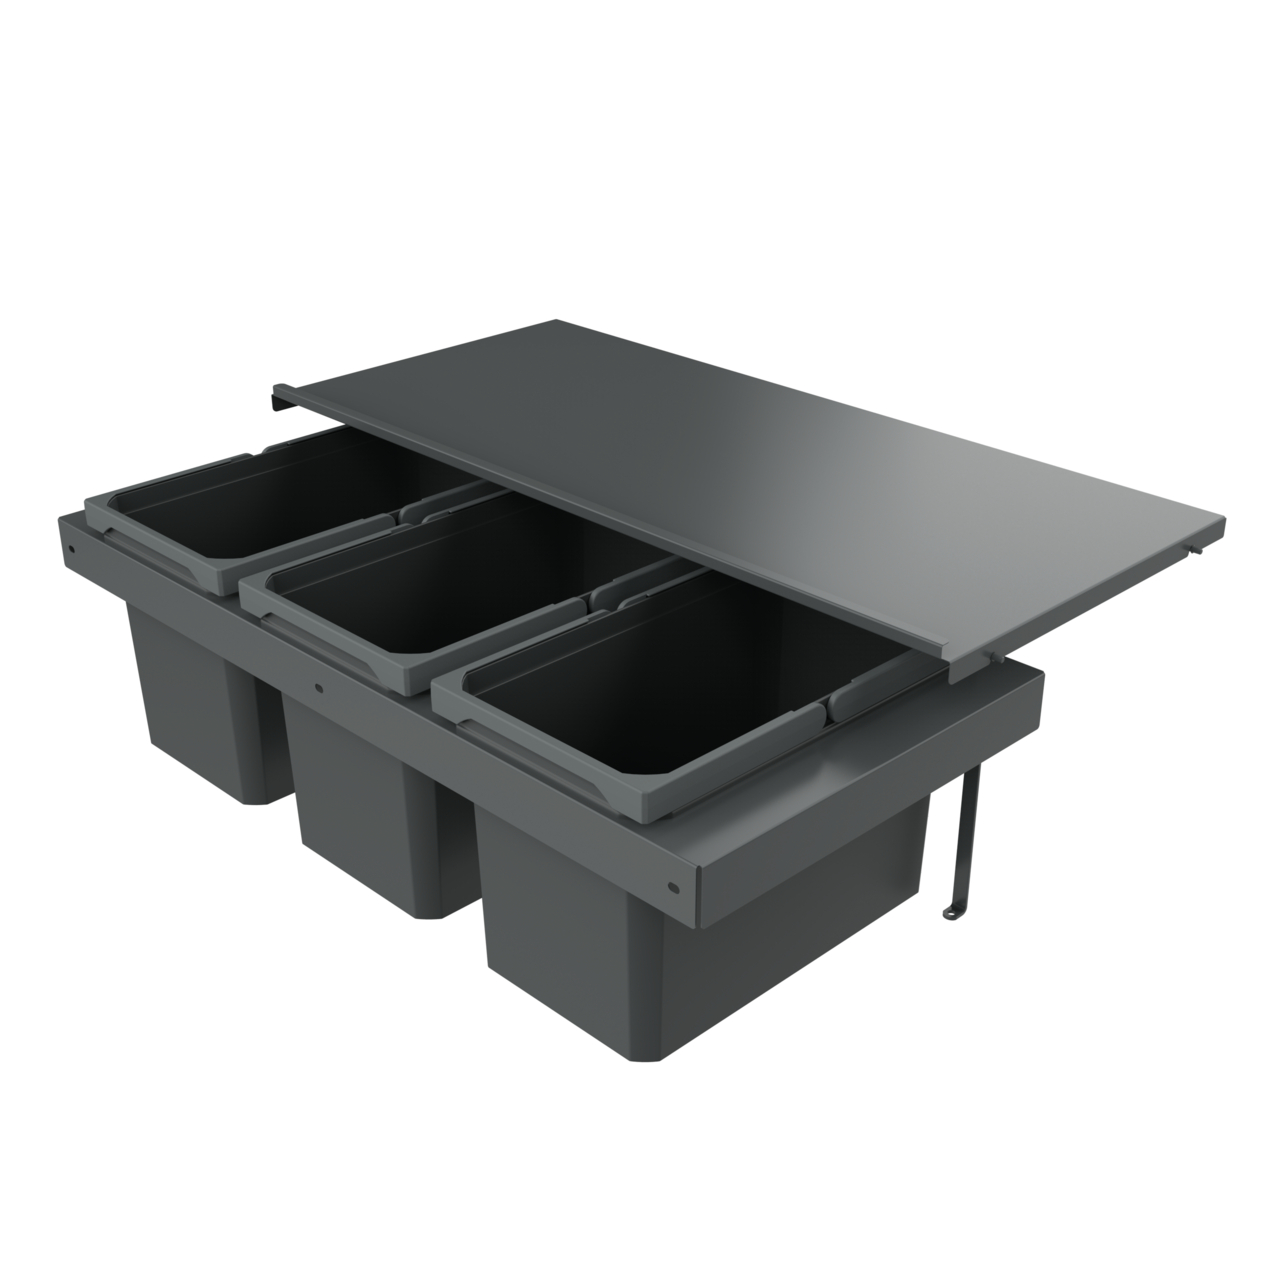  Cox Stand-UP® 280 S/900-3, anthracite, H 275 mm